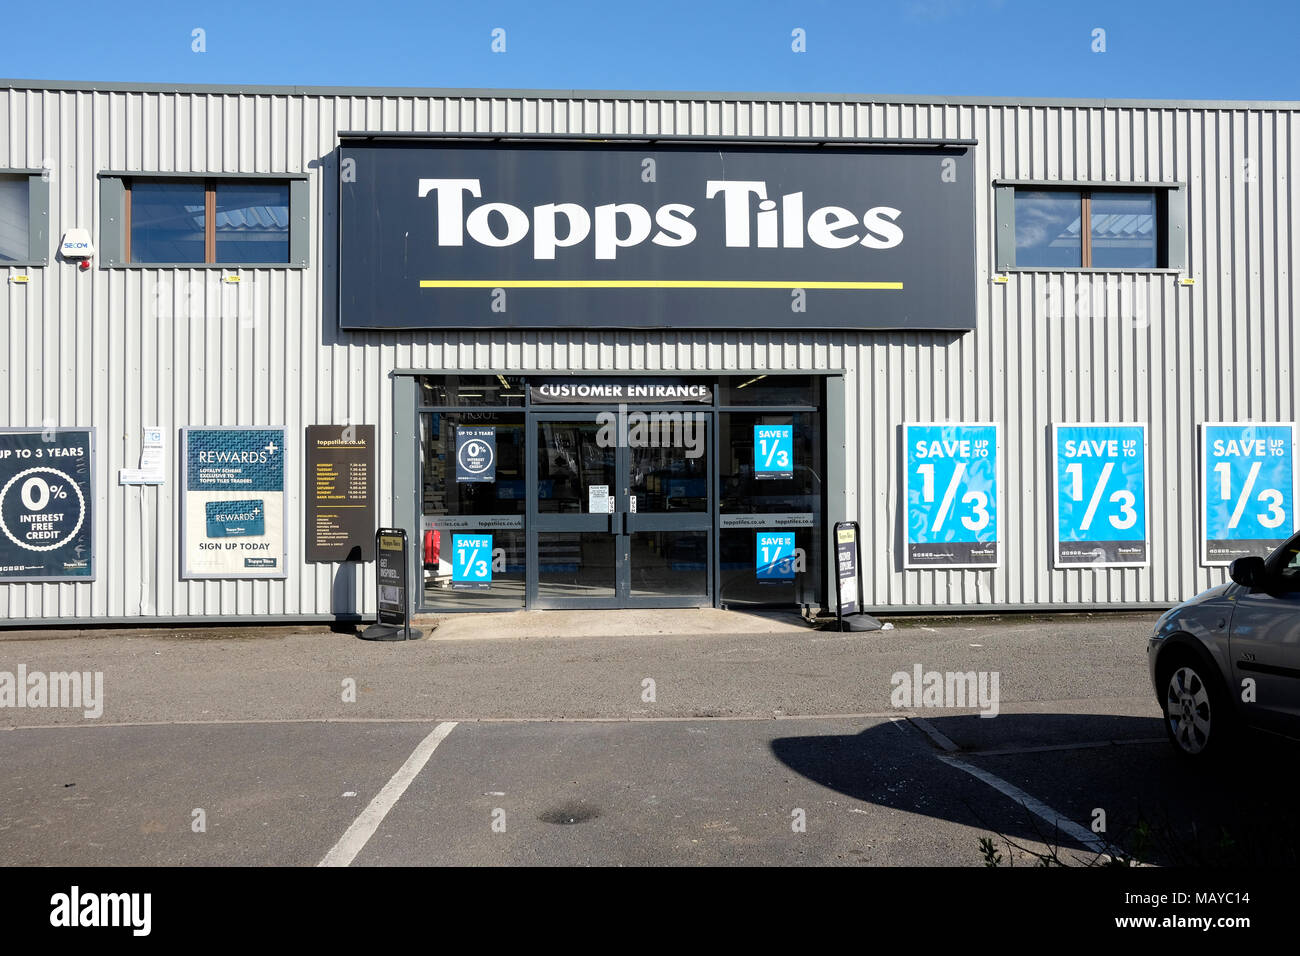 A vue of Topps tiles shop in Willesden, London Stock Photo